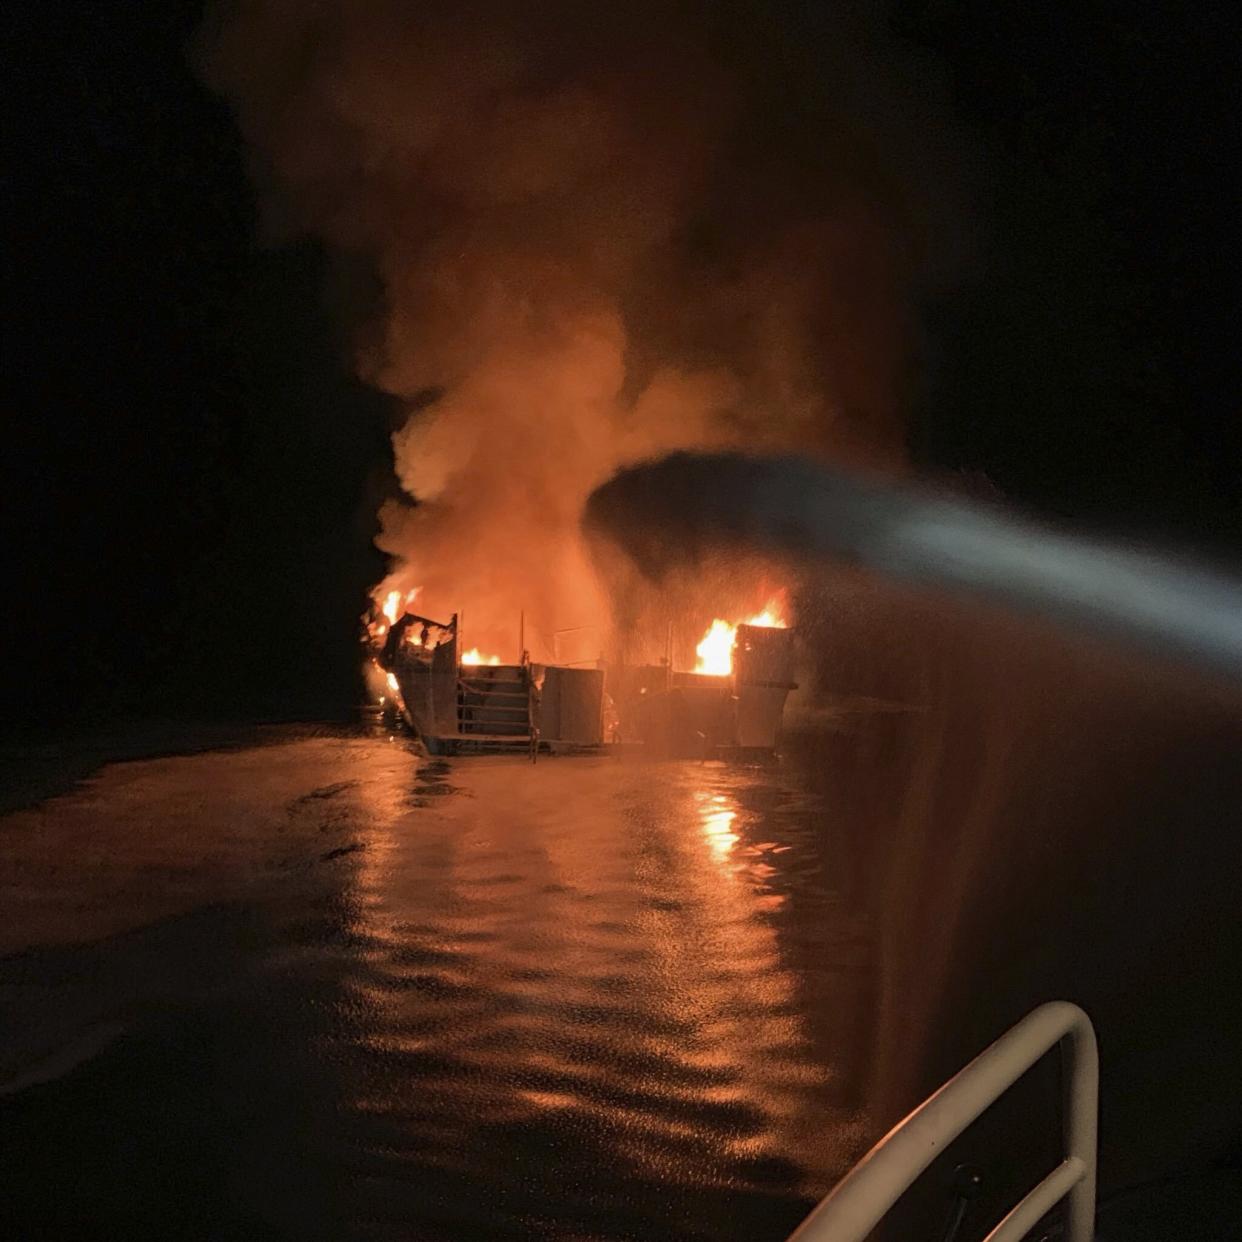 In this photo provided by the Ventura County Fire Department, VCFD firefighters respond to a boat fire off the coast of southern California, Monday, Sept. 2, 2019. The U.S. Coast Guard said it has launched several boats to help over two dozen people "in distress" off the coast of southern California. (Ventura County Fire Department via AP)